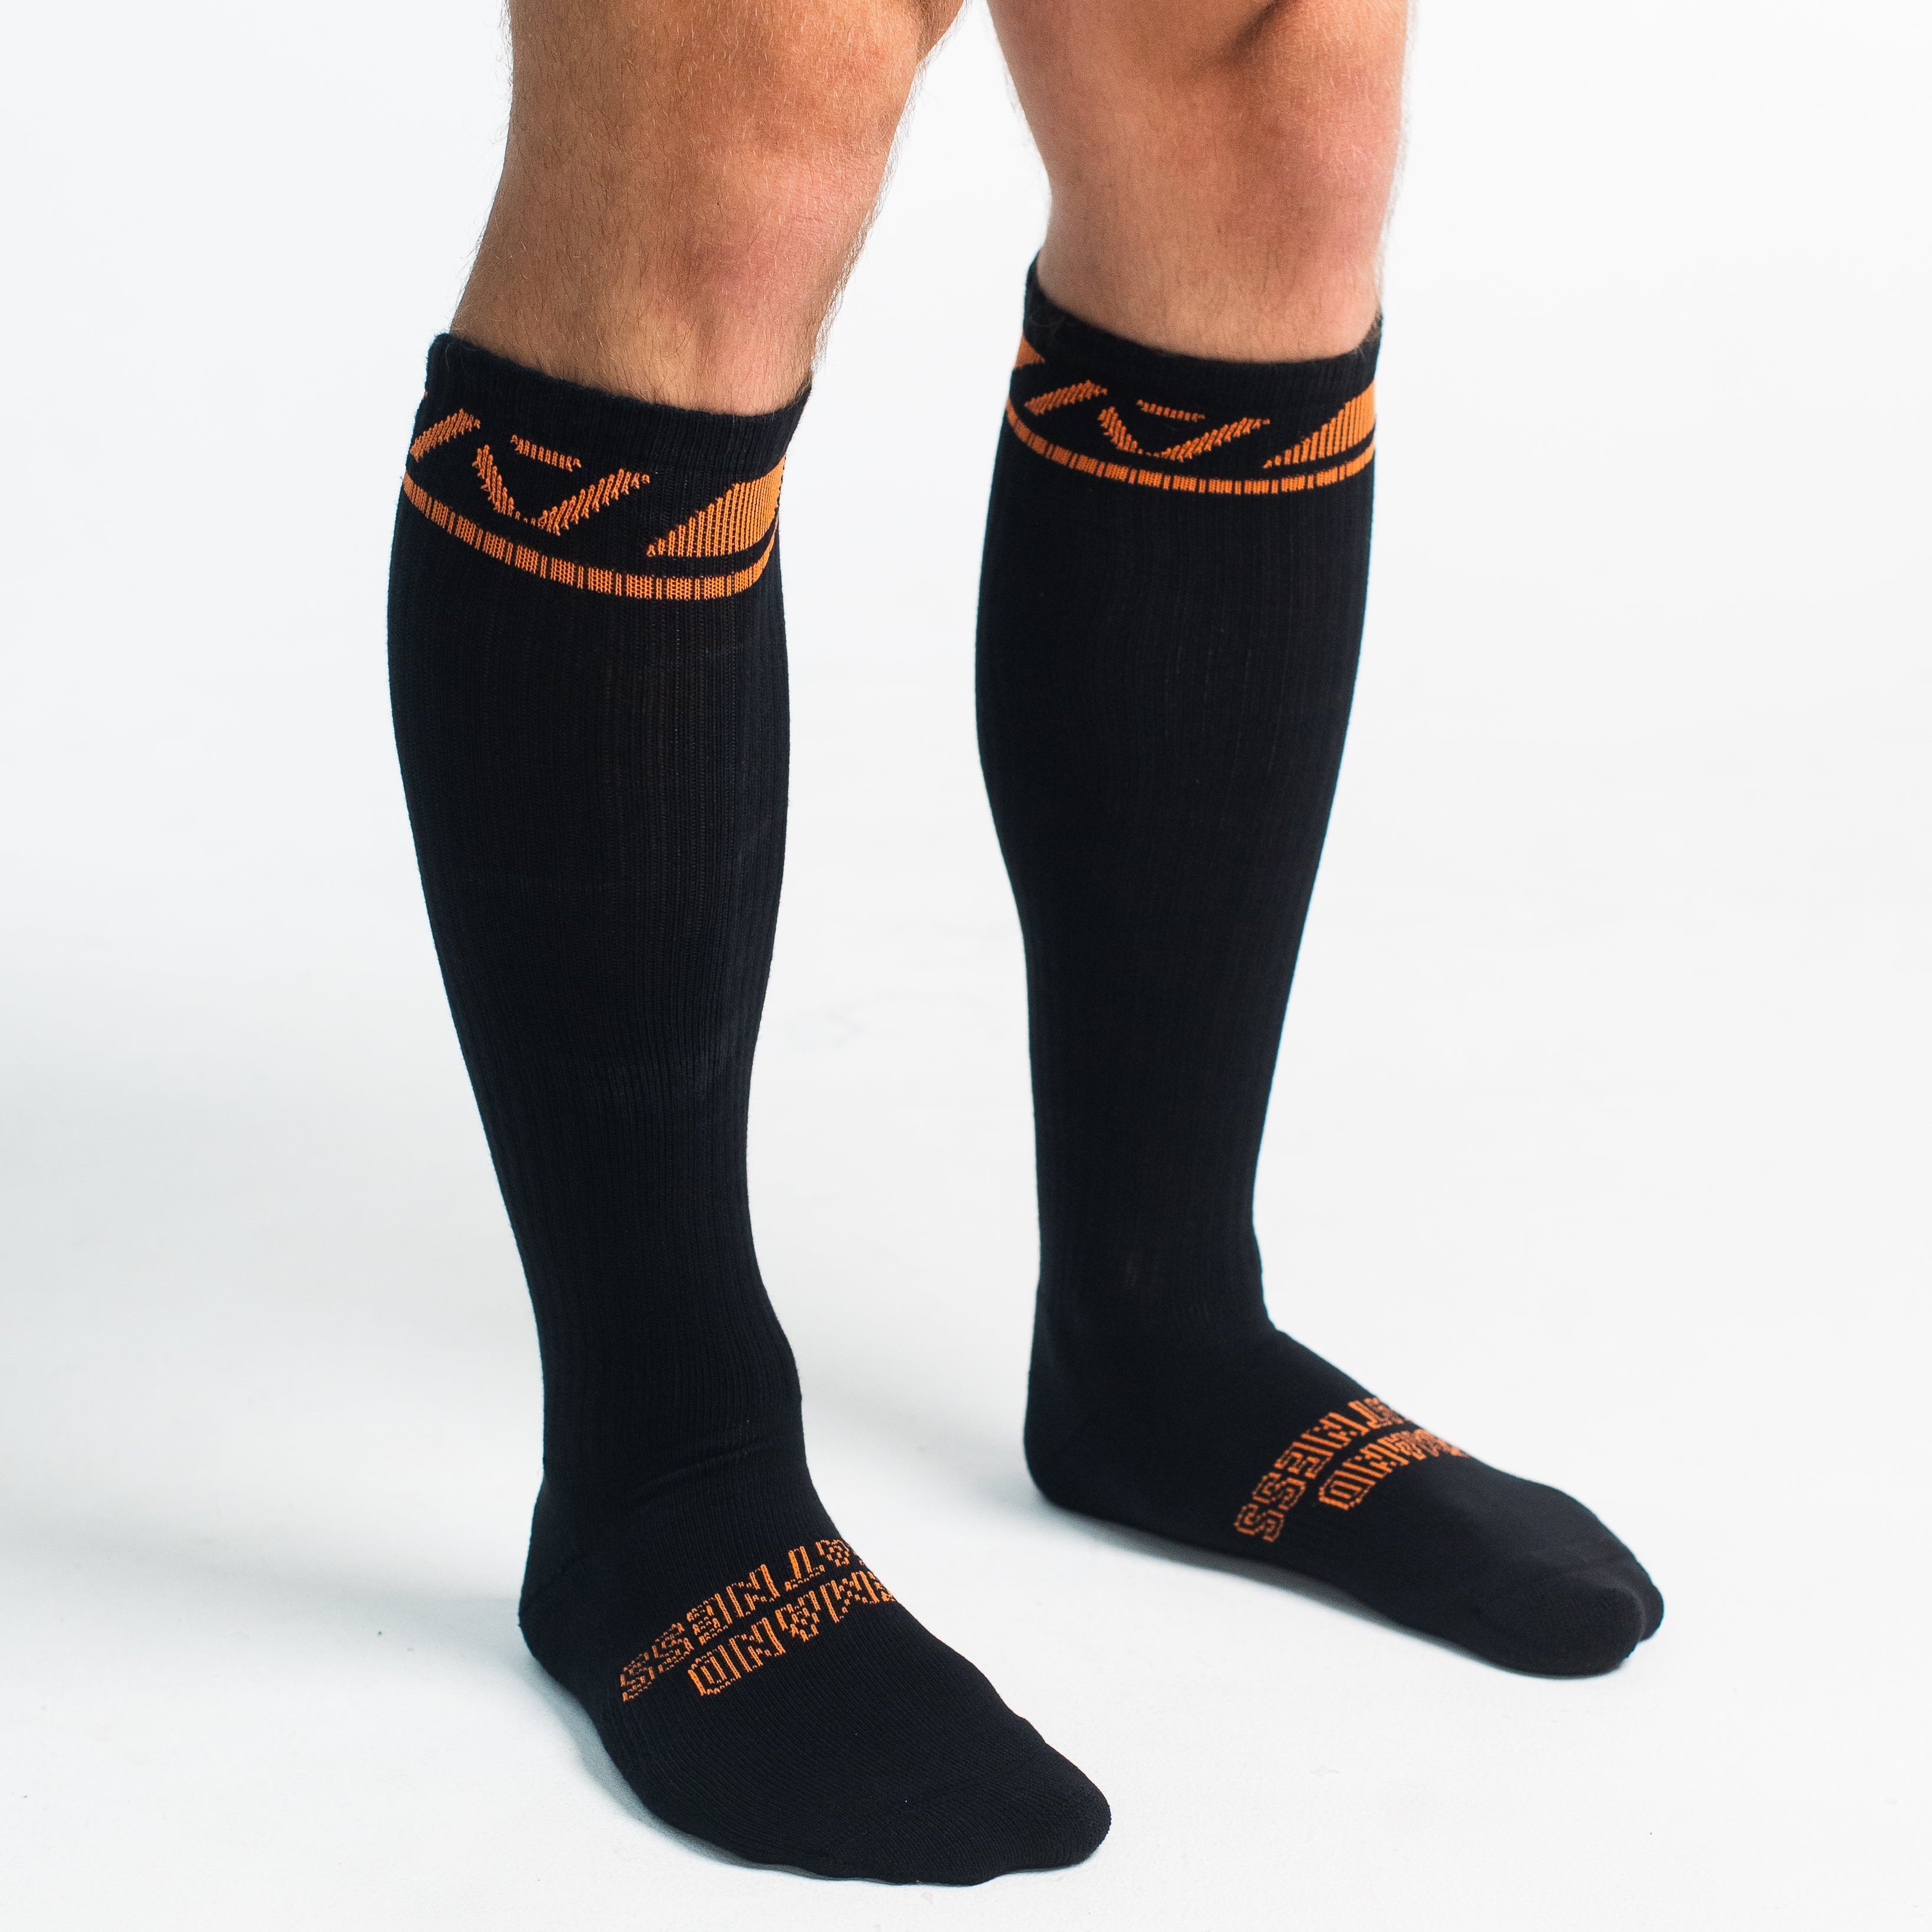 A7 Blaze deadlift socks are designed specifically for pulls and keep your shins protected from scrapes. A7 deadlift socks are a perfect pair to wear in training or powerlifting competition. The A7 IPF Approved Kit includes Powerlifting Singlet, A7 Meet Shirt, A7 Zebra Wrist Wraps, A7 Deadlift Socks, Hourglass Knee Sleeves (Stiff Knee Sleeves and Rigor Mortis Knee Sleeves). All A7 Powerlifting Equipment shipping to UK, Norway, Switzerland and Iceland.